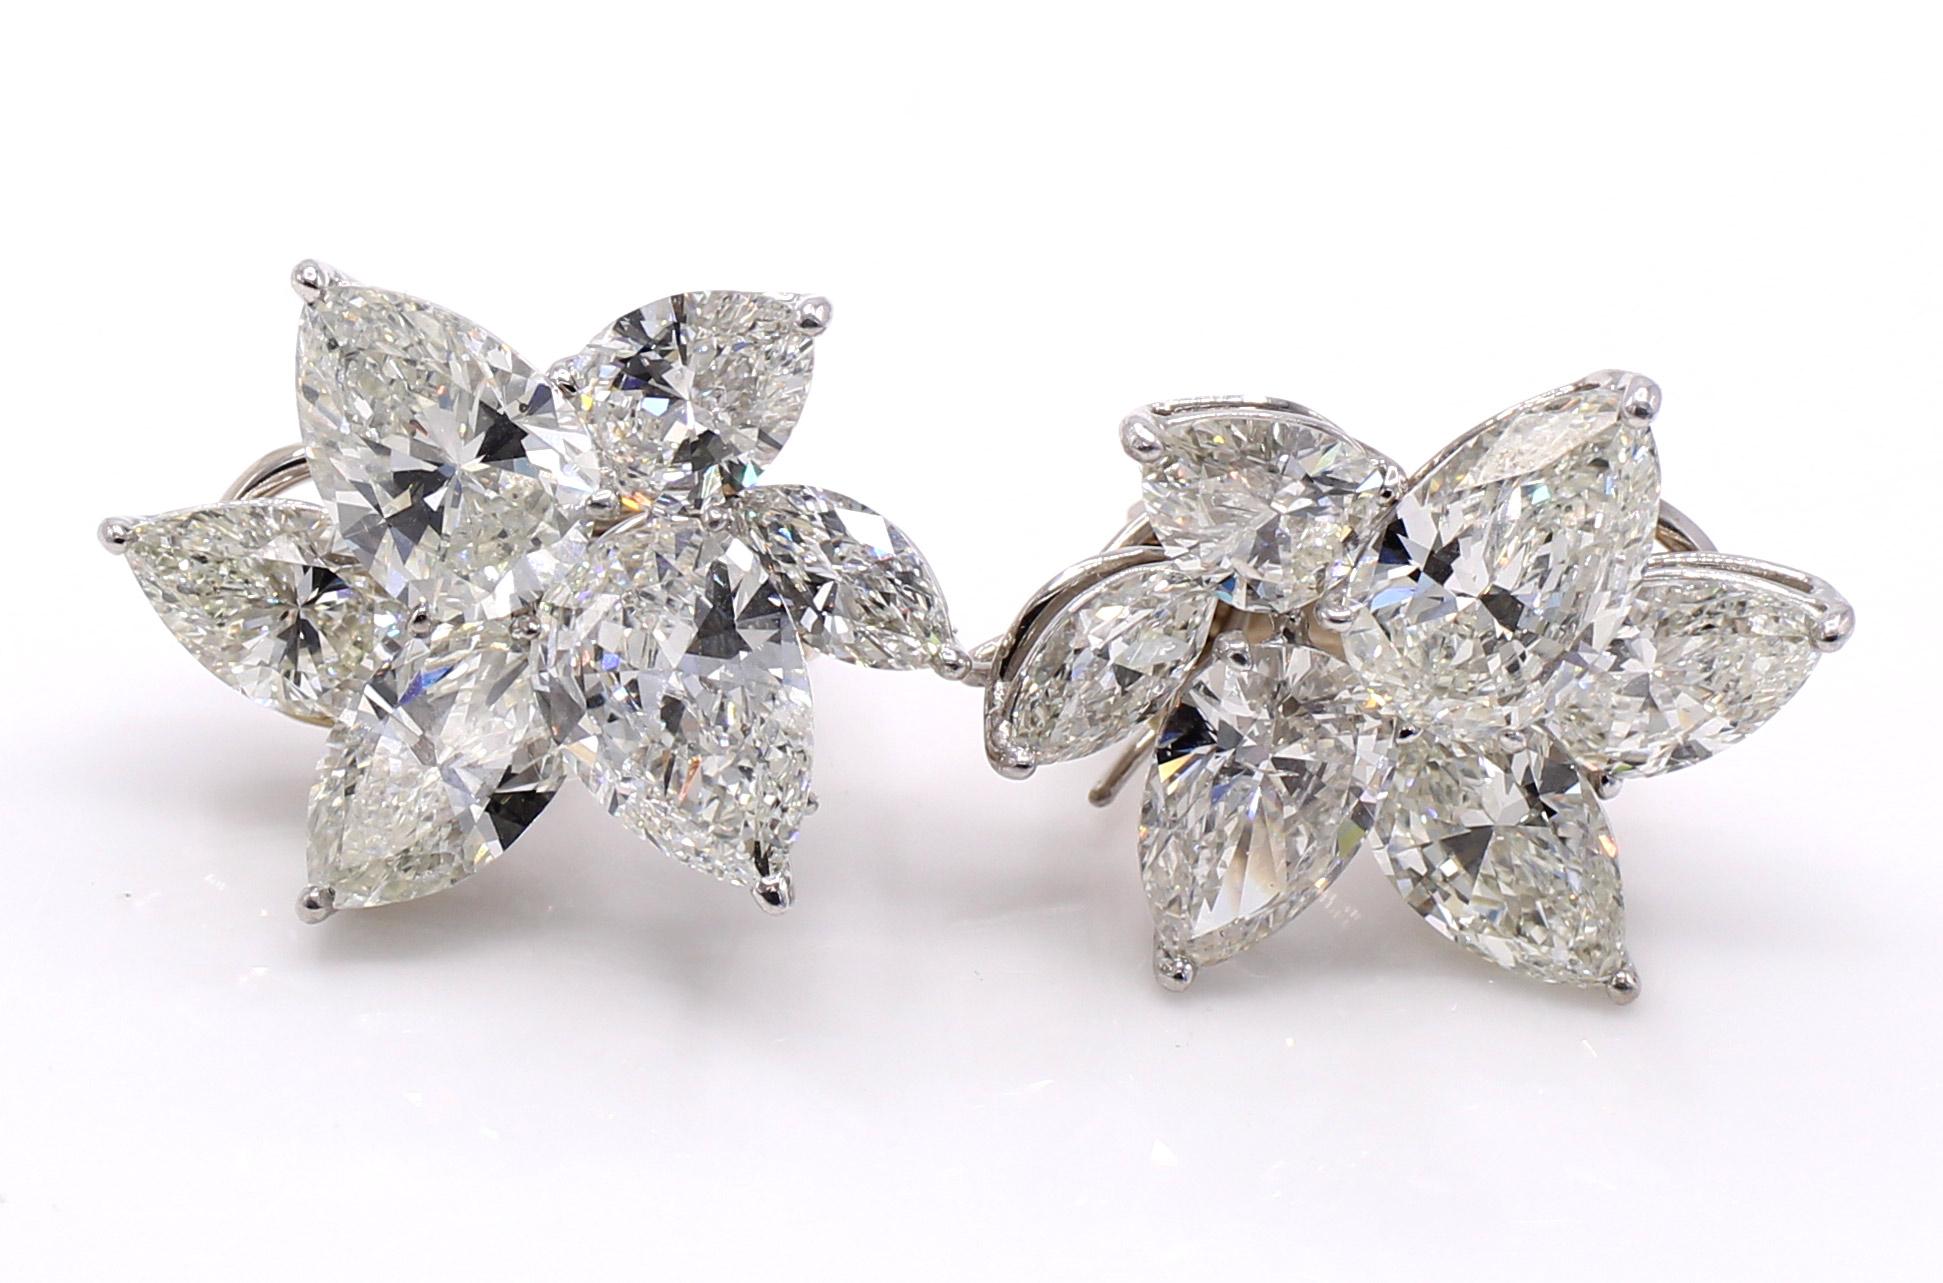 Unique pair of finely handcrafted platinum diamond cluster ear clips. In the Winston-Style, the pear shaped diamonds are set at various levels to give the earring a true three-dimensional appearance with maximum brilliancy. With the largest pear